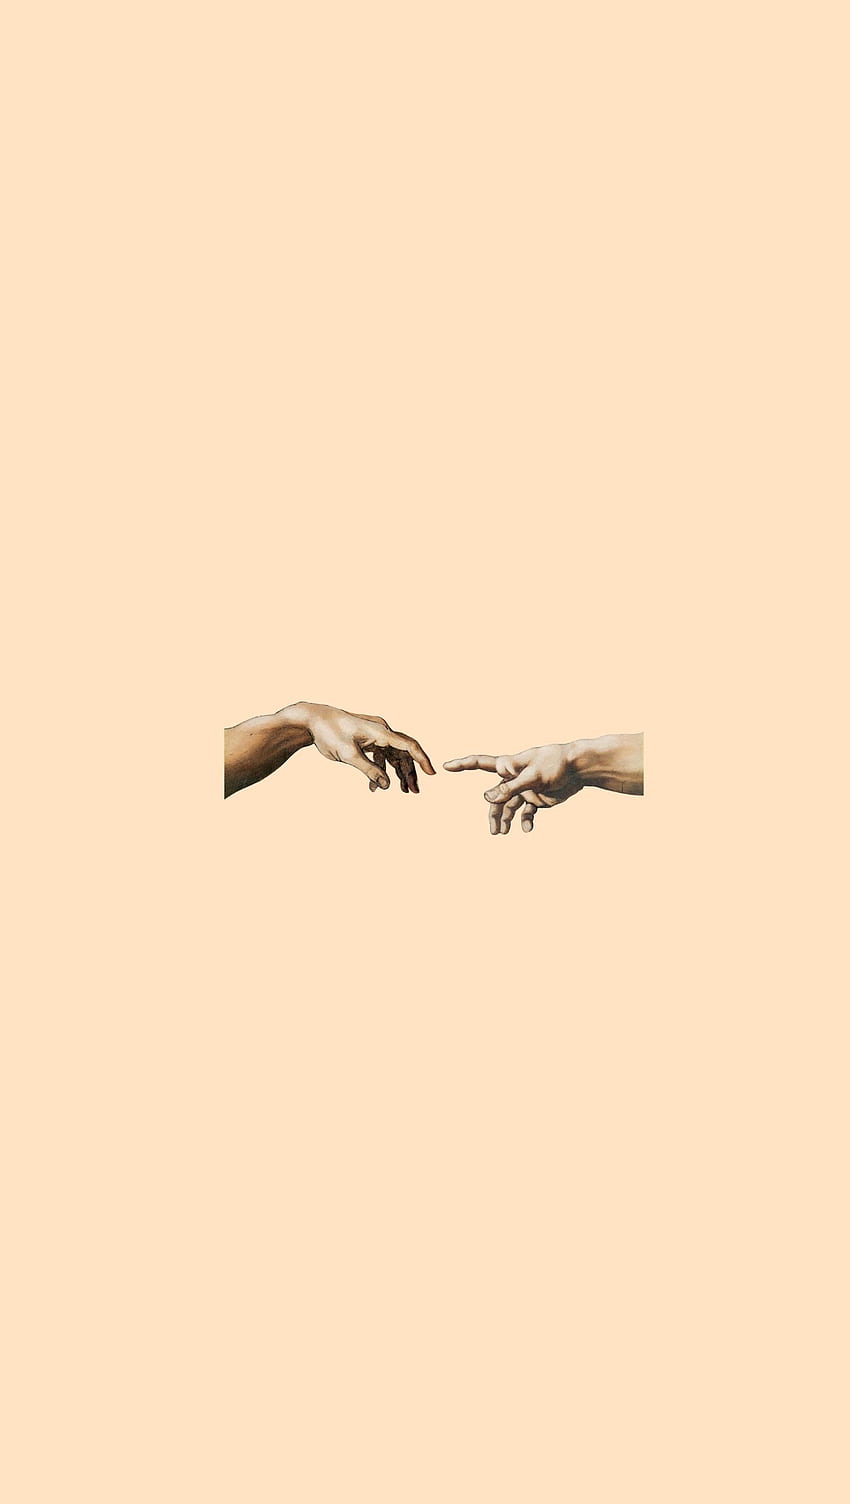 michelangelo's the creation of adam hands made by moi. Hand , Aesthetic iphone , Art iphone HD phone wallpaper